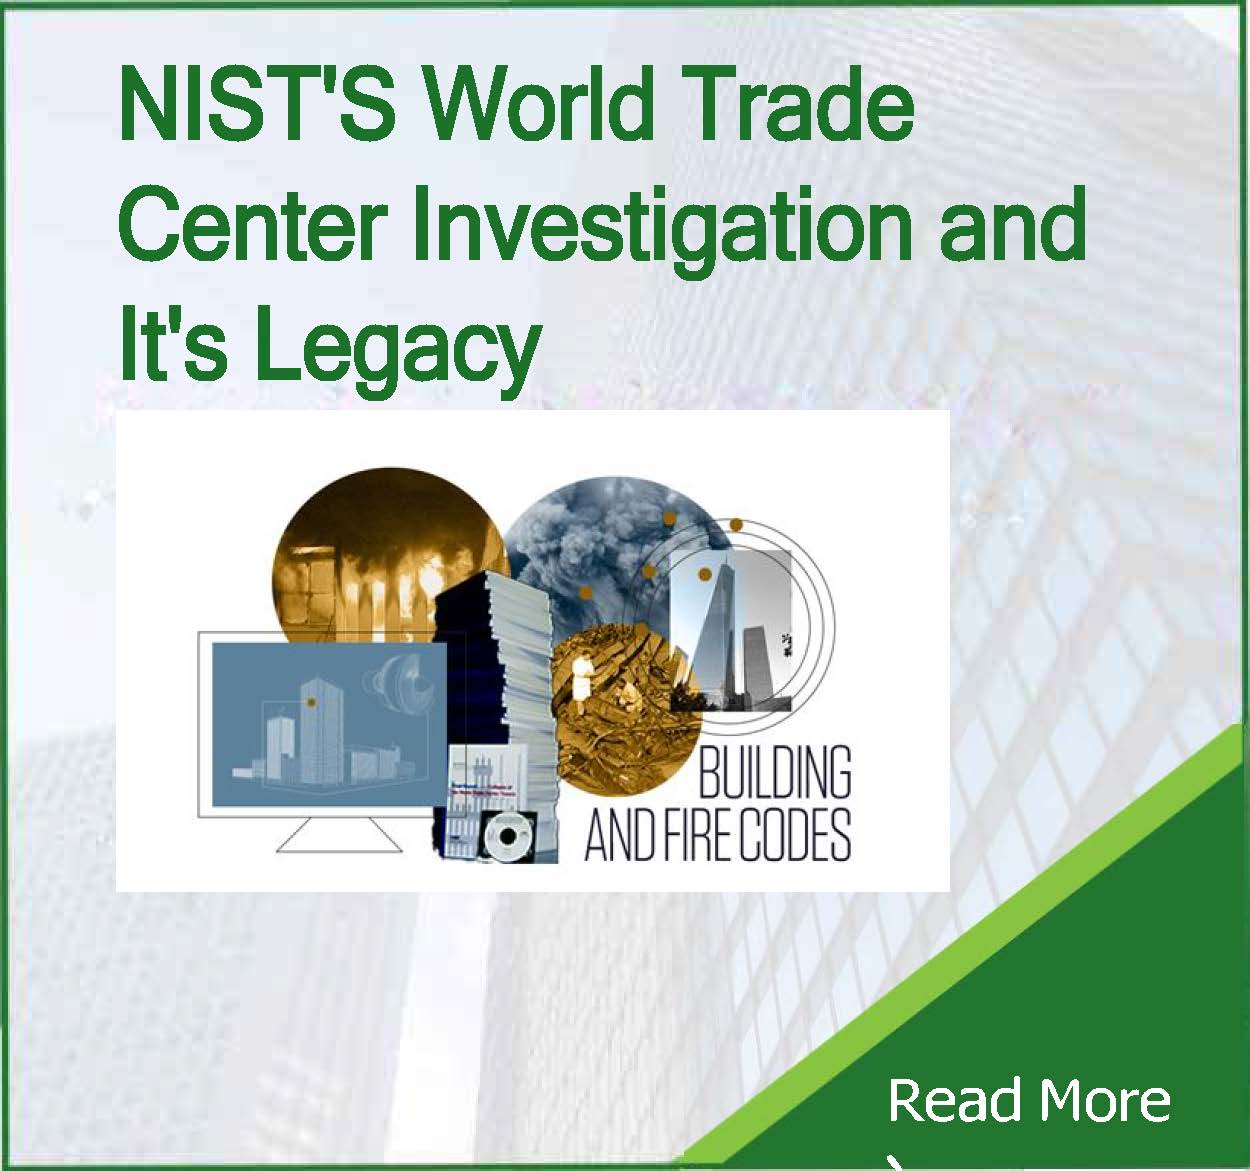 20 Years Later: NIST’s World Trade Center Investigation and Its Legacy